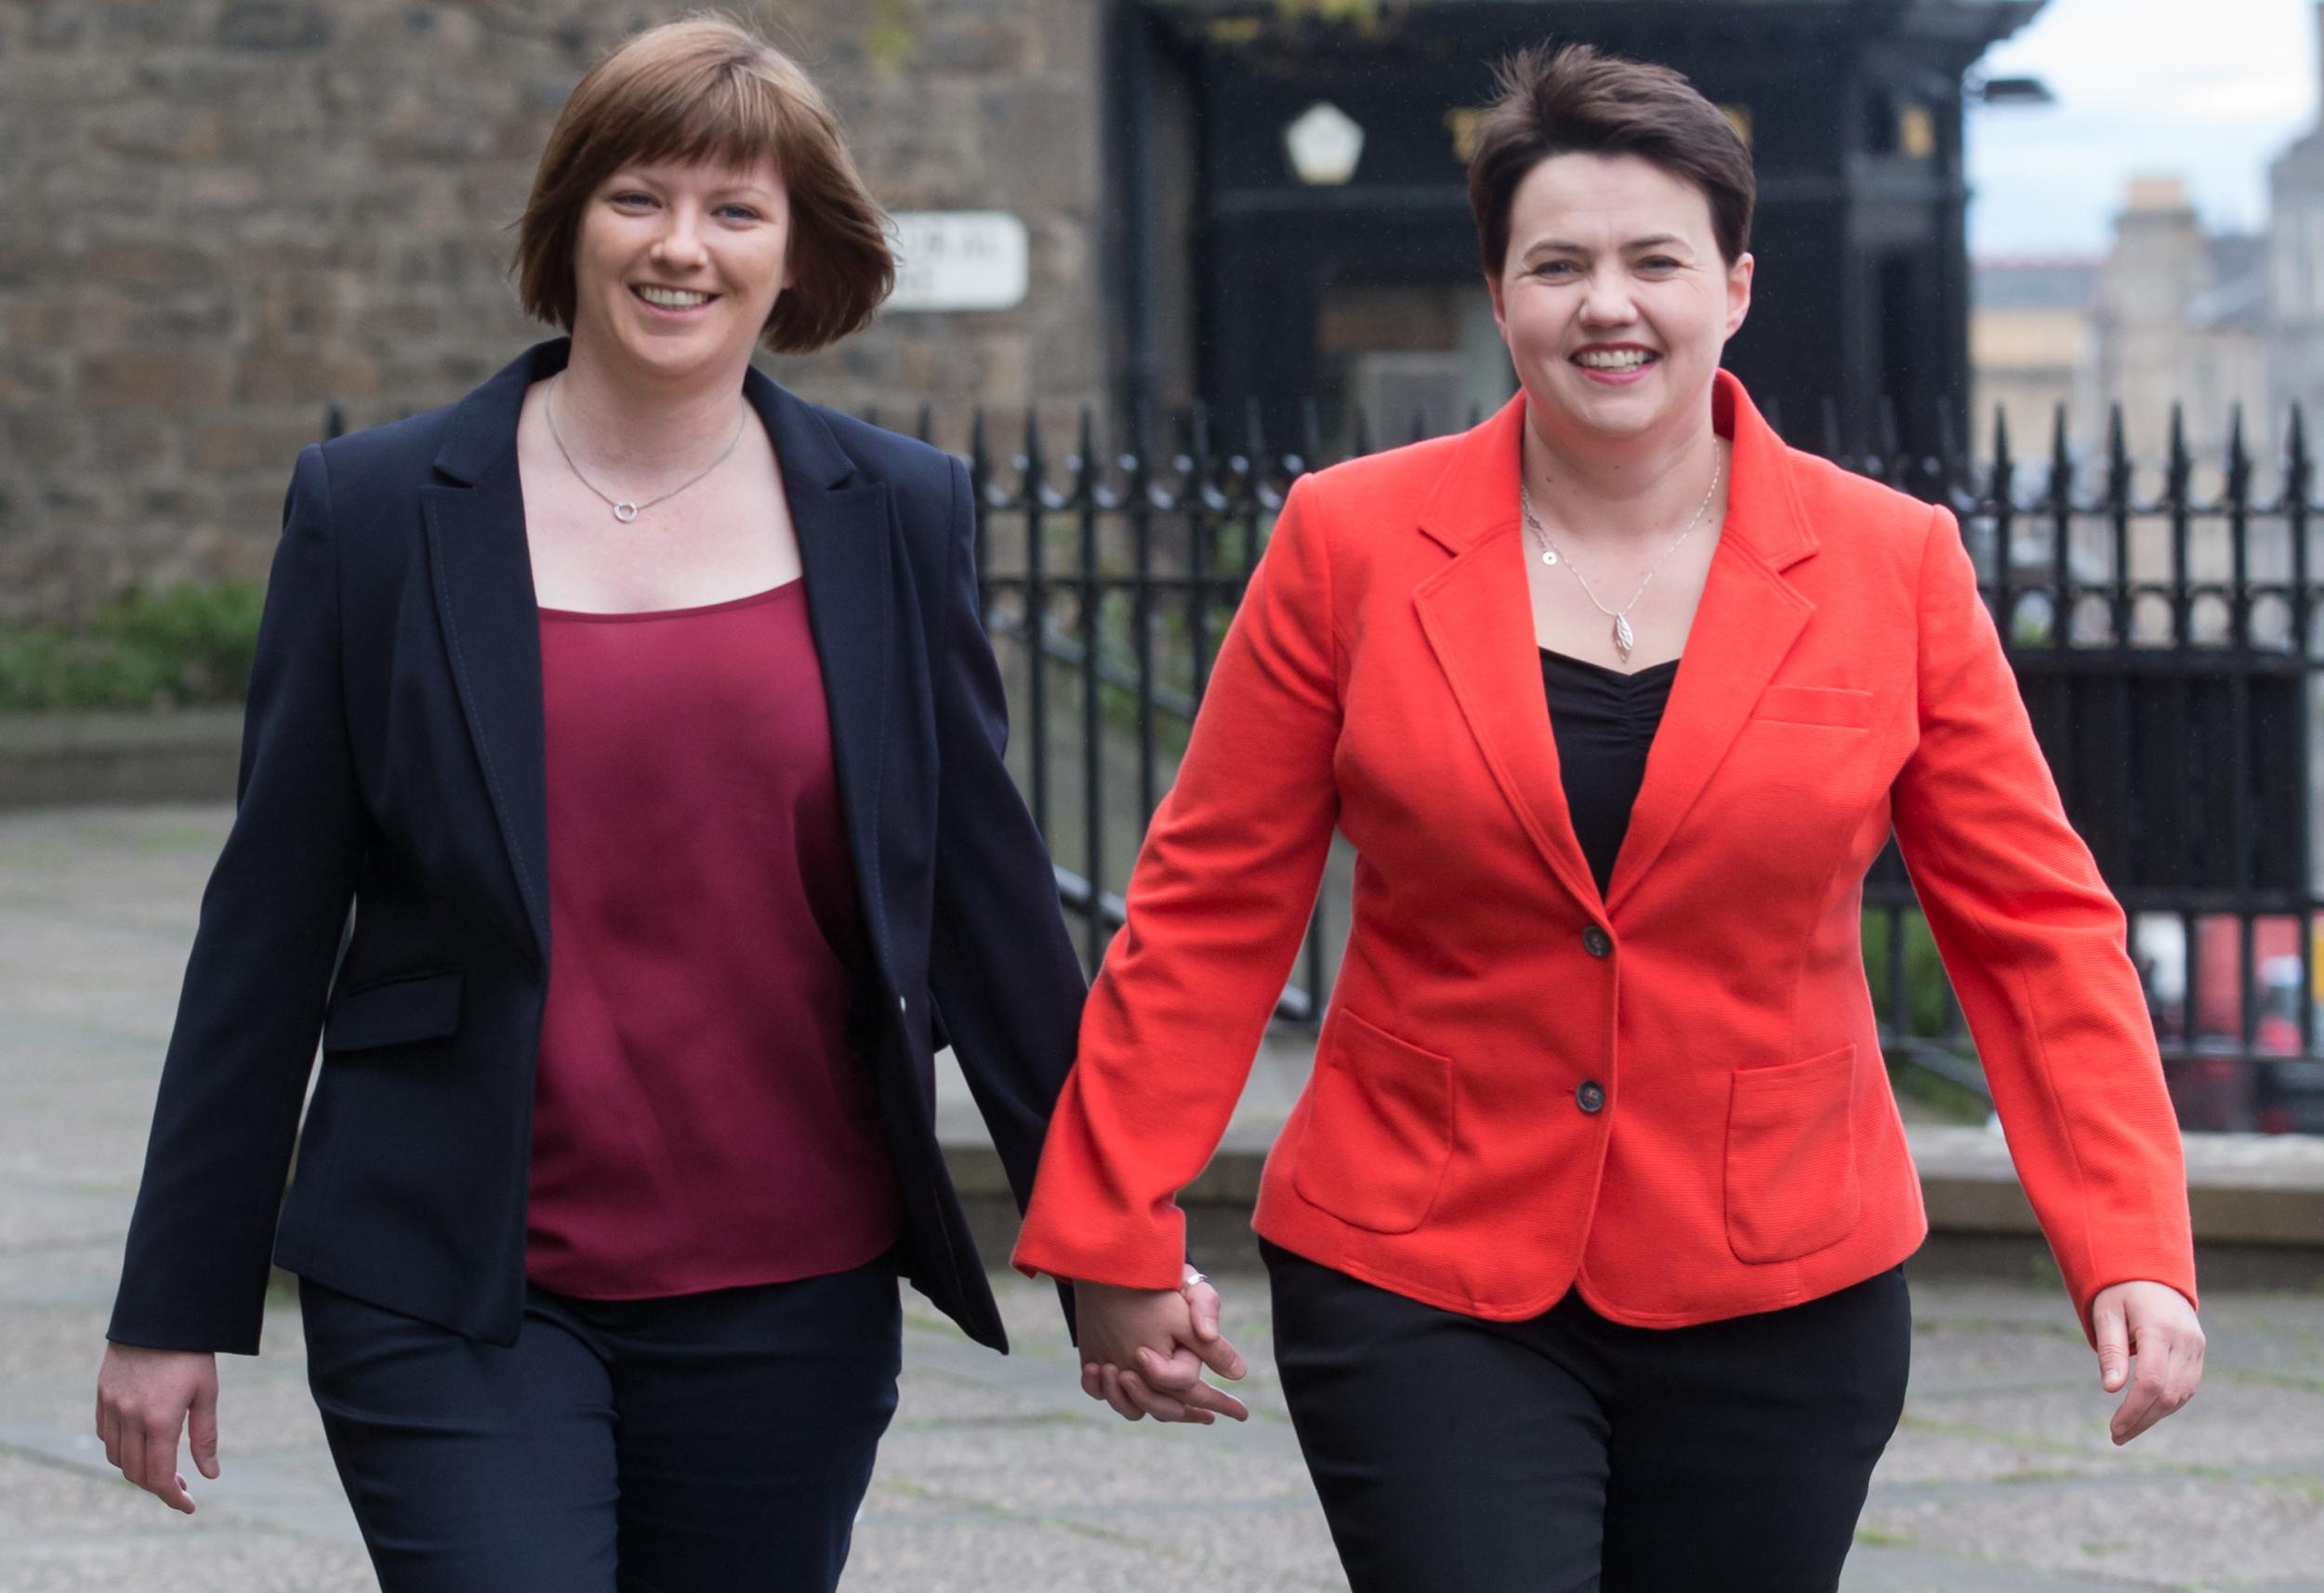 Ms Davidson with her partner Jen Wilson during the Scottish Parliament elections earlier this year